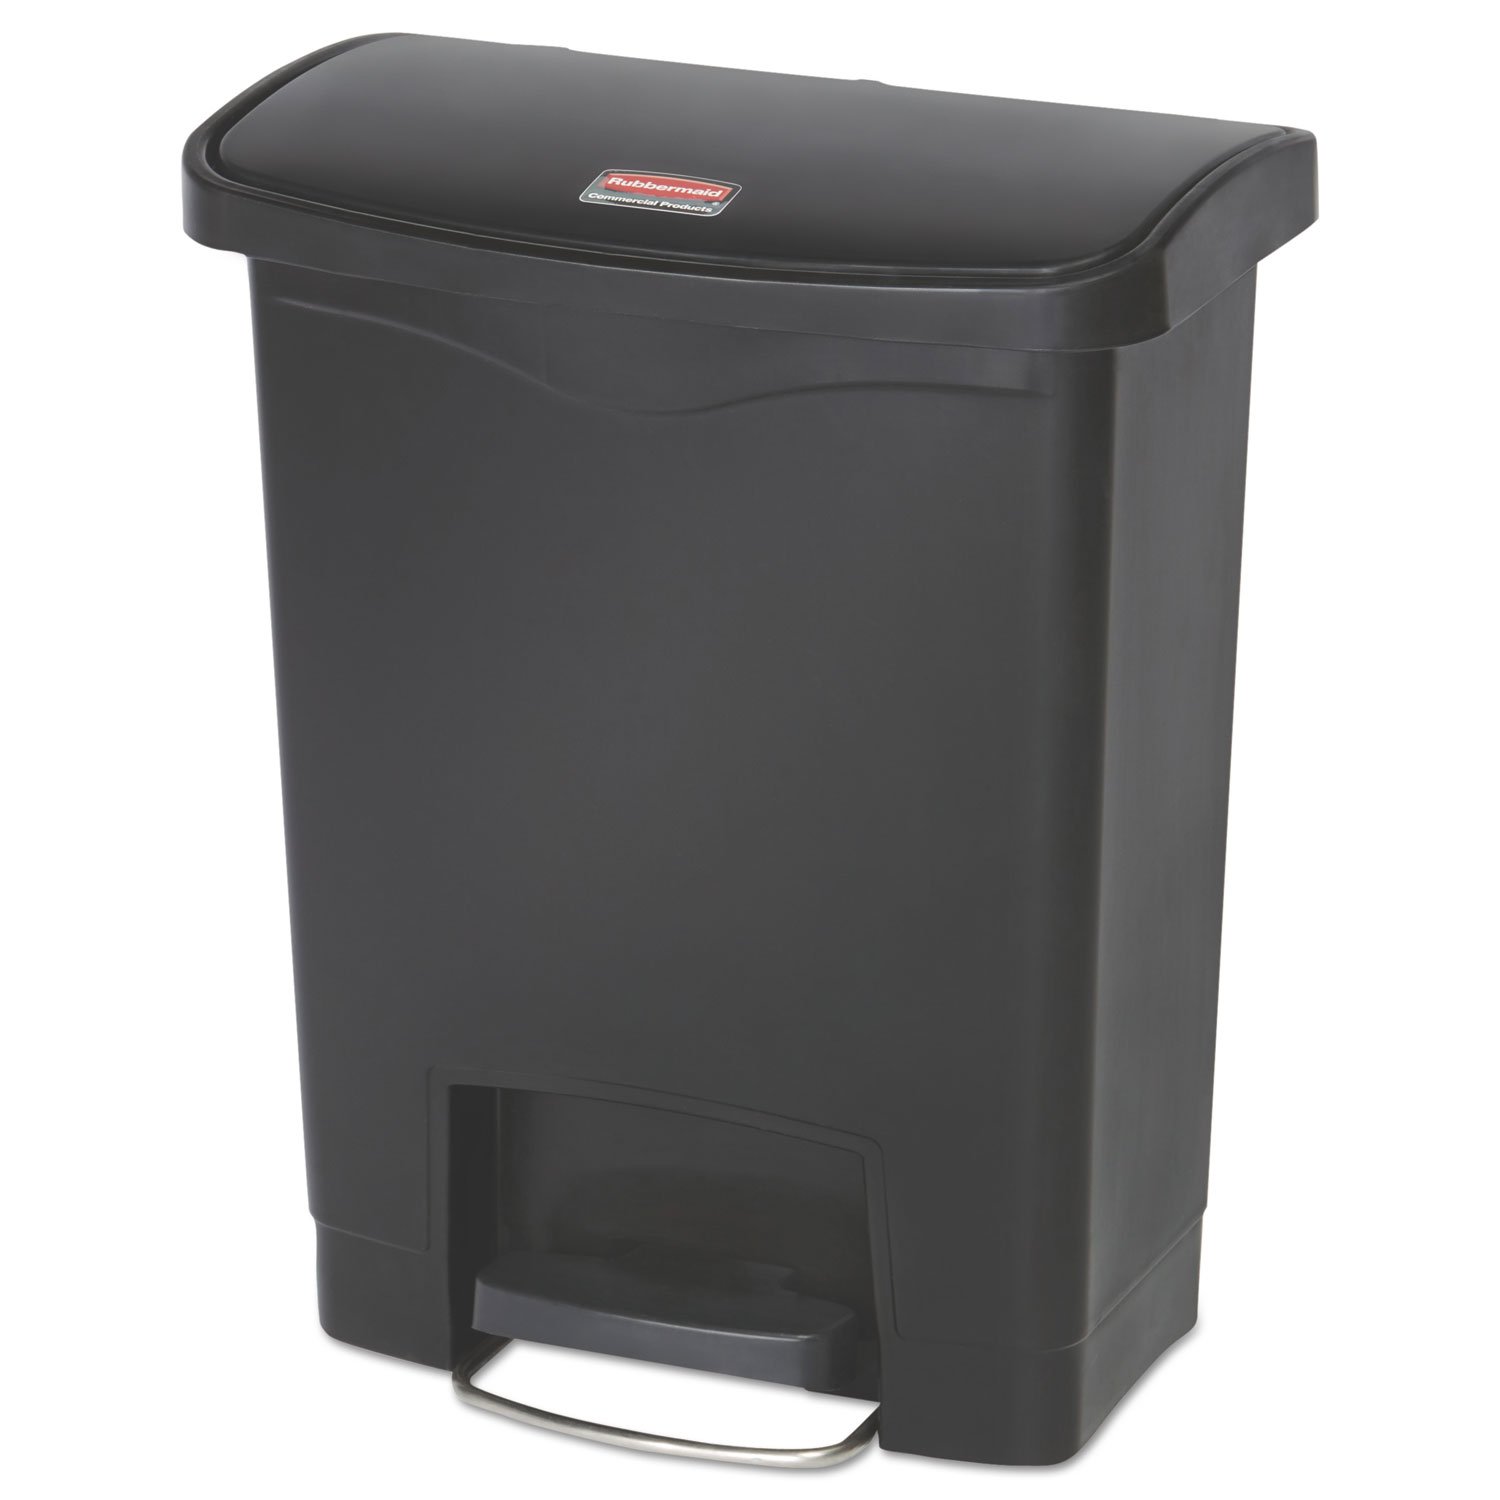 Rubbermaid Commercial Products Slim Jim 1883609 30 Litre Front Step Step-On Resin Wastebasket - Black